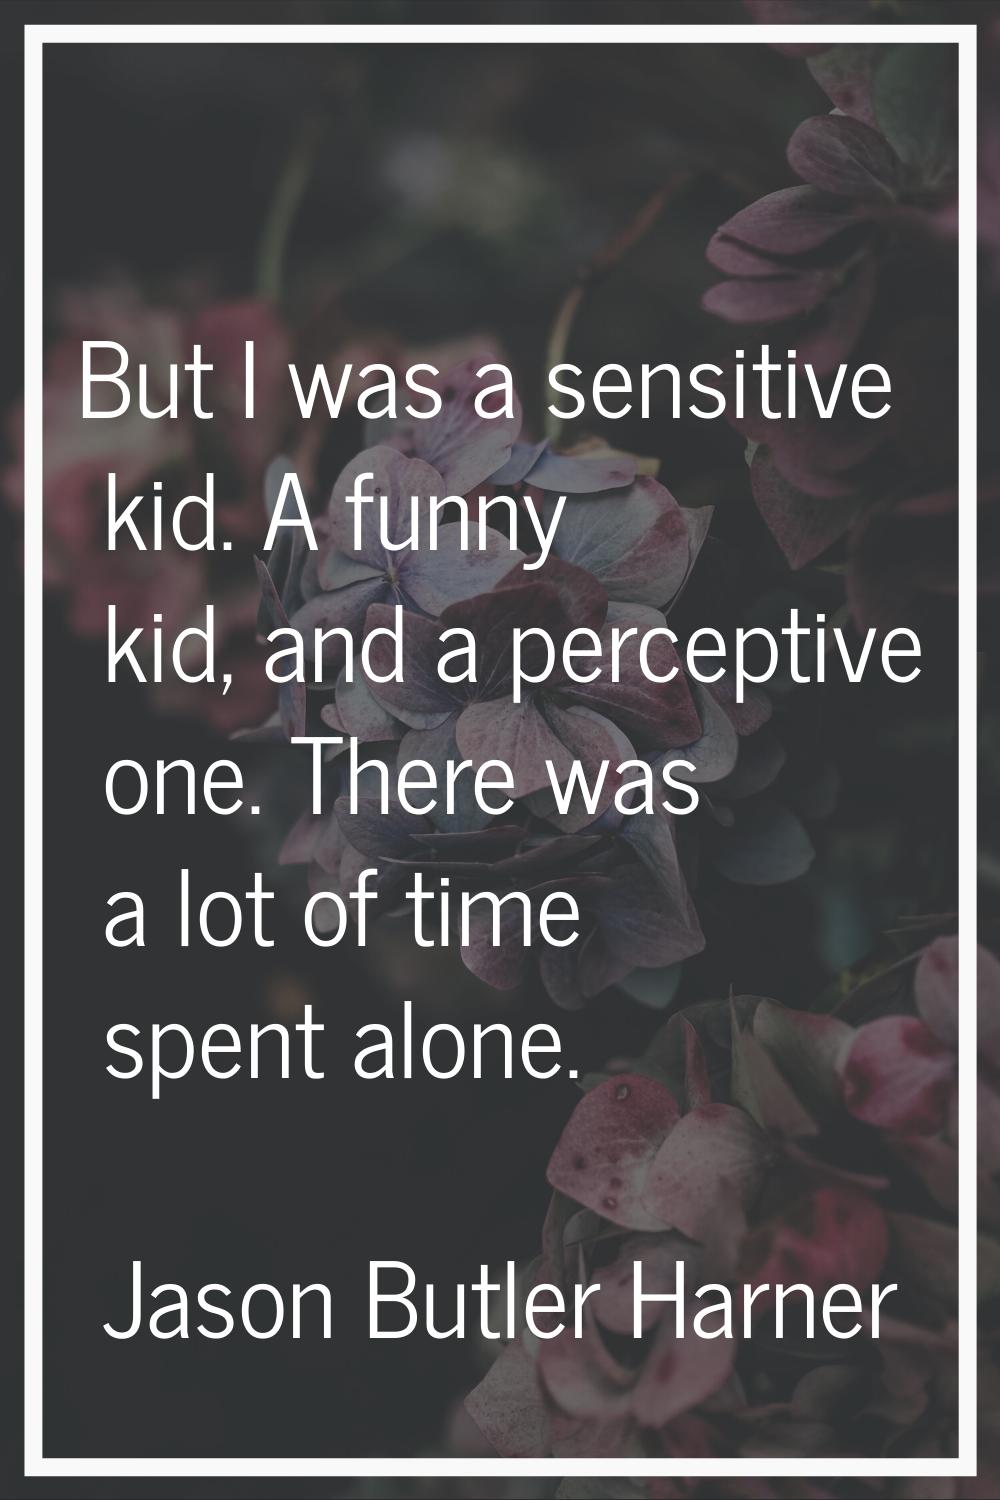 But I was a sensitive kid. A funny kid, and a perceptive one. There was a lot of time spent alone.